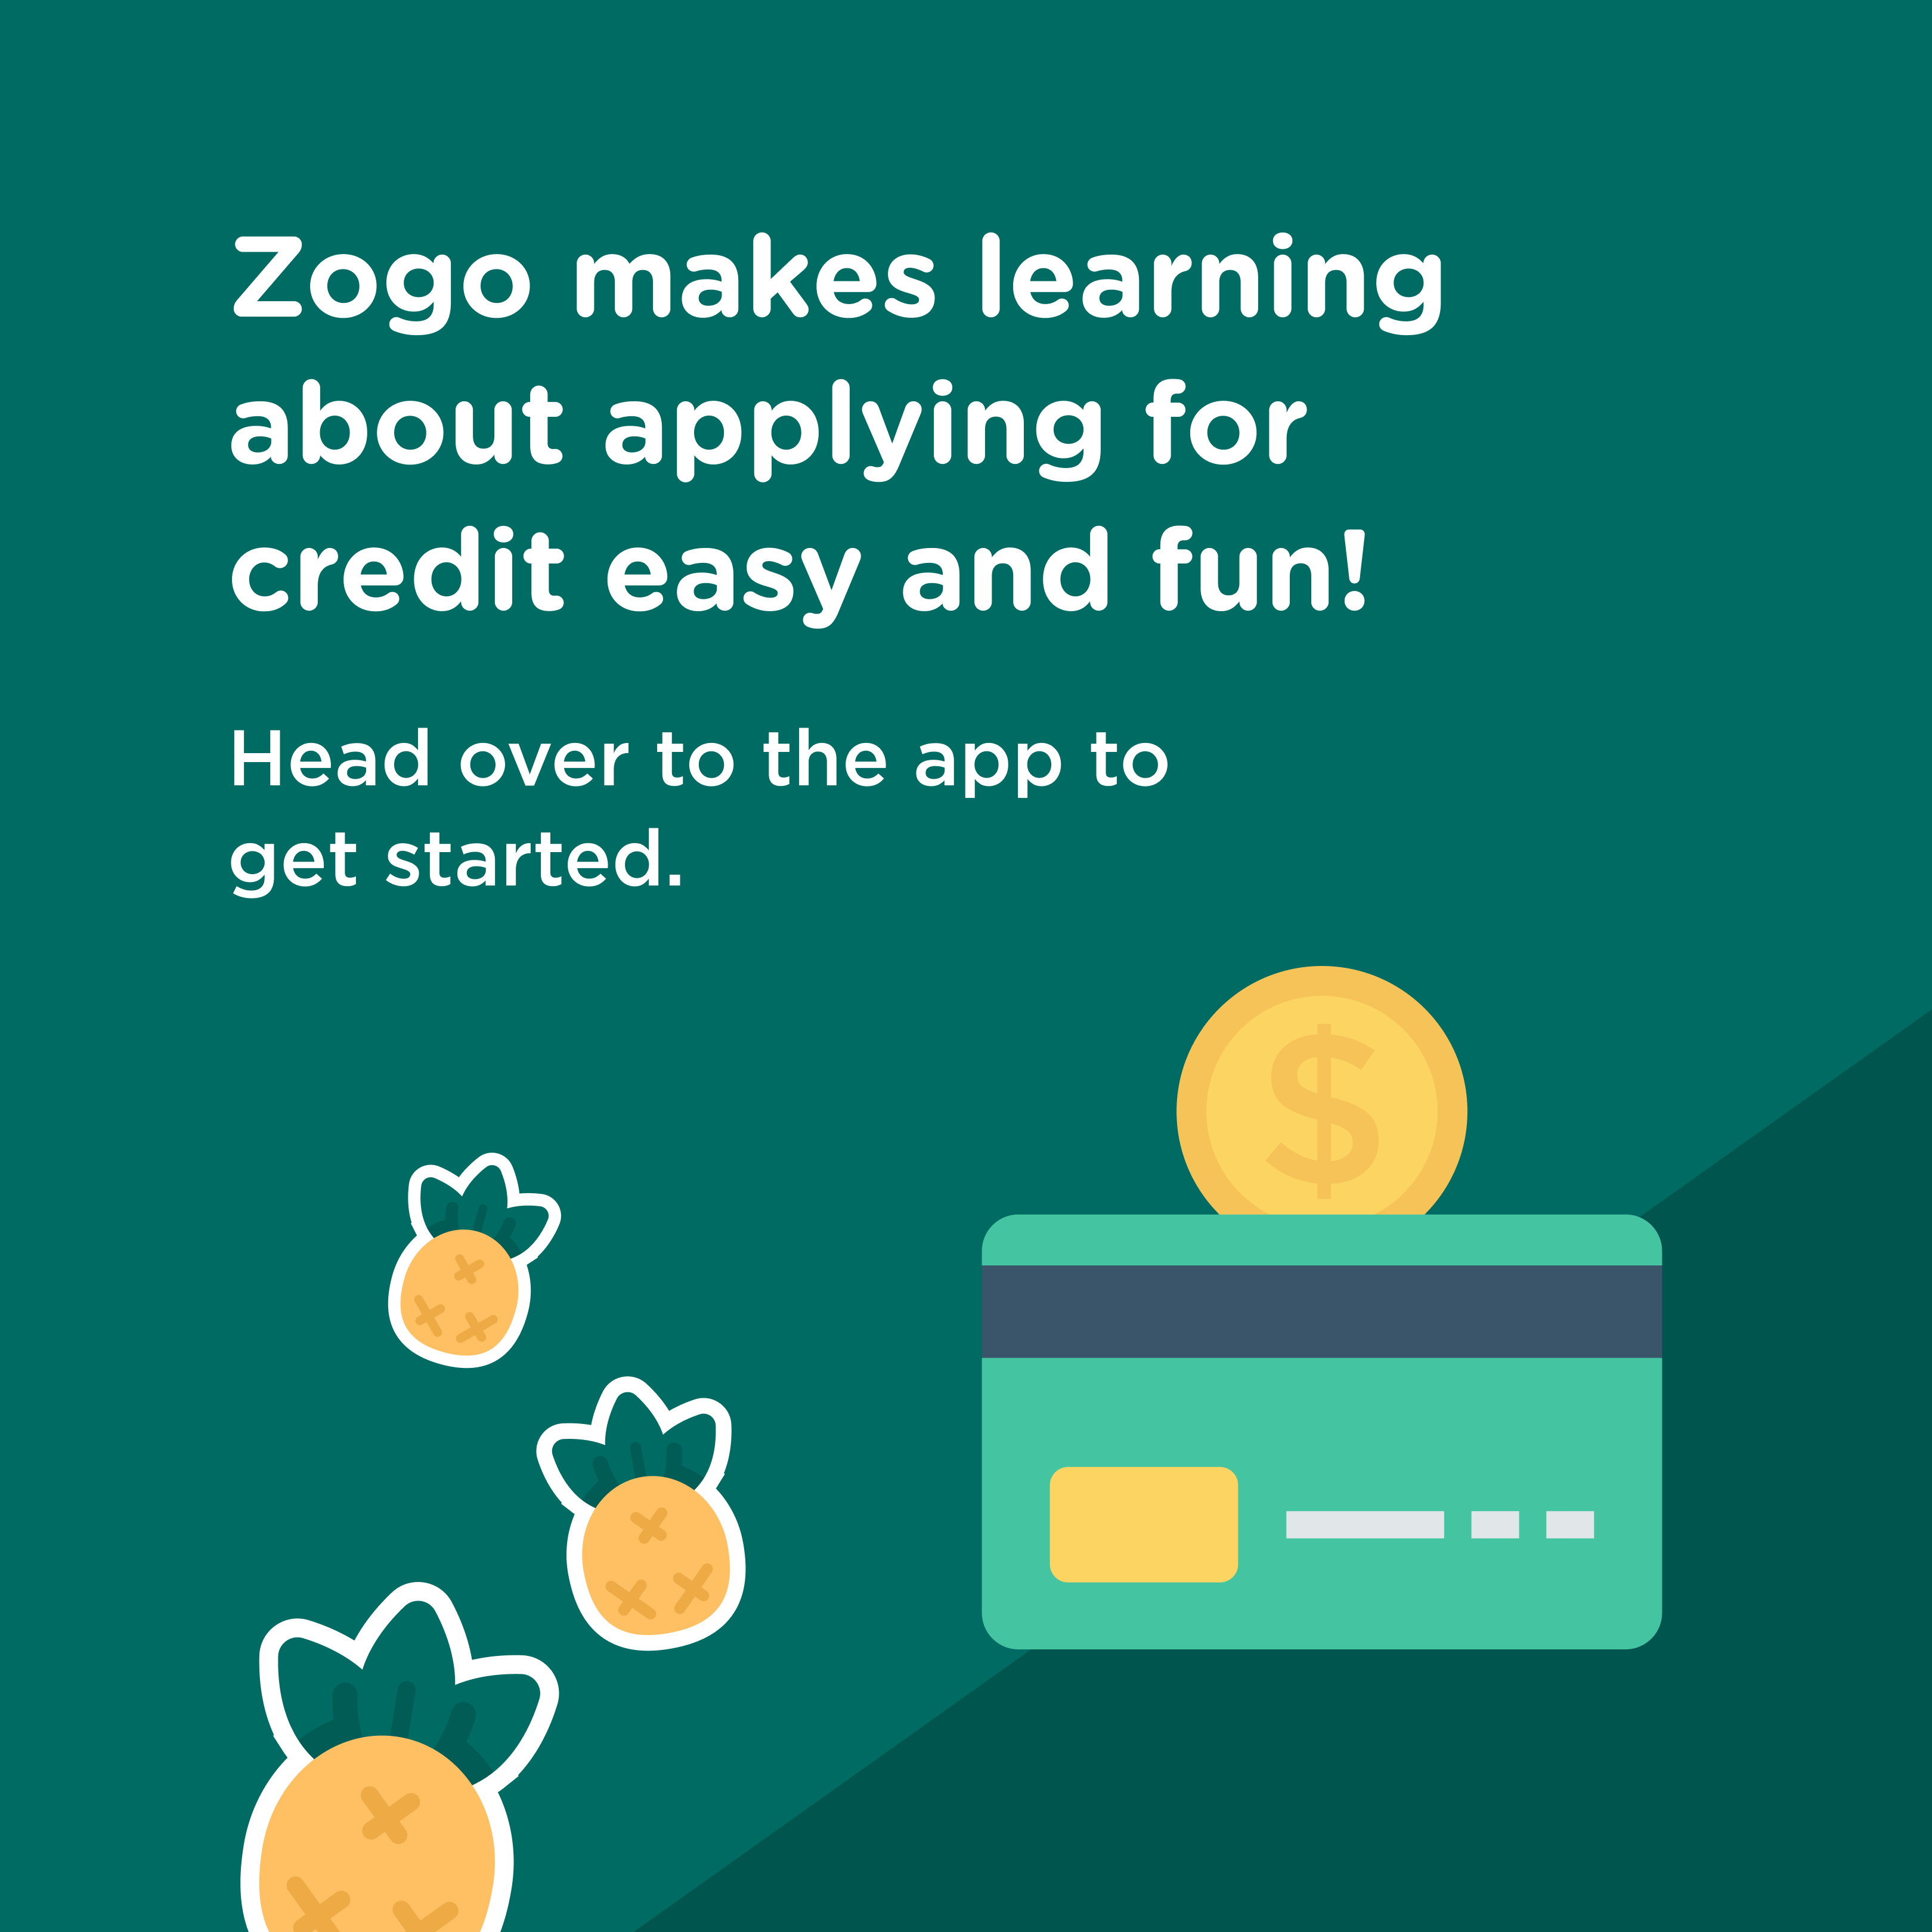 Green background with pine apples, Copy says Zogo makes learning about applying for credit easy and fun.